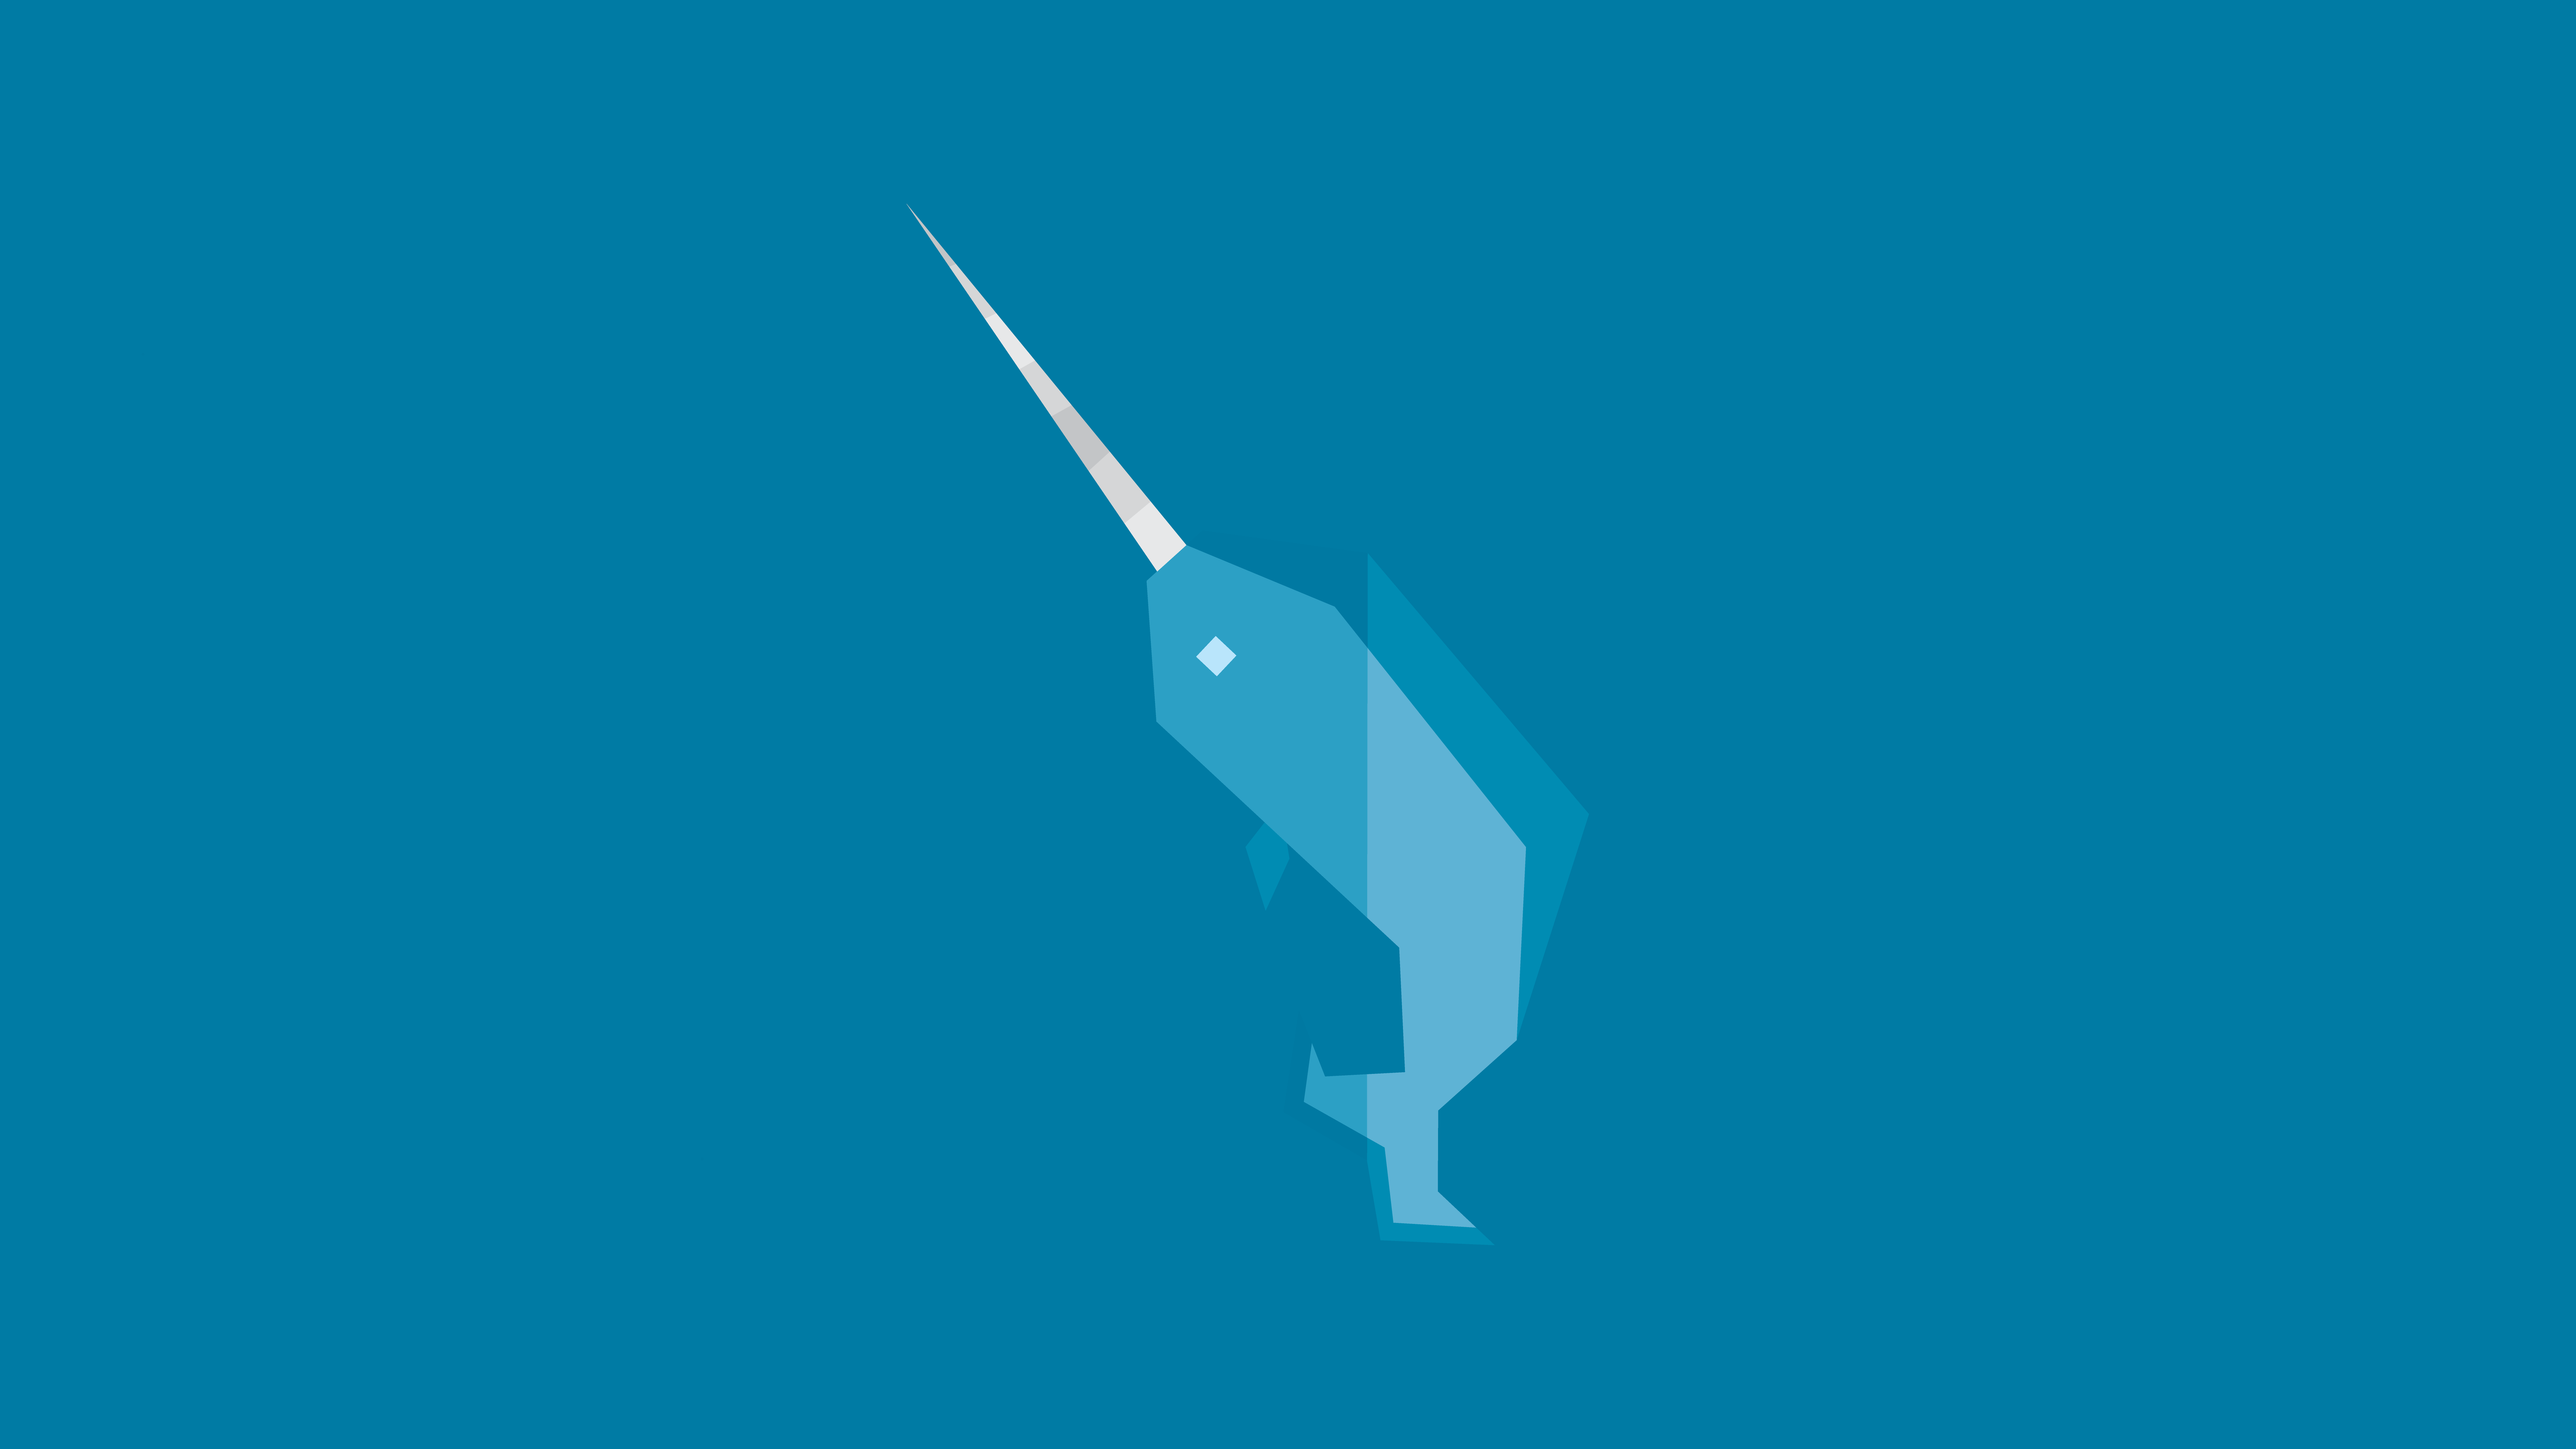 Narwhale Wallpapers